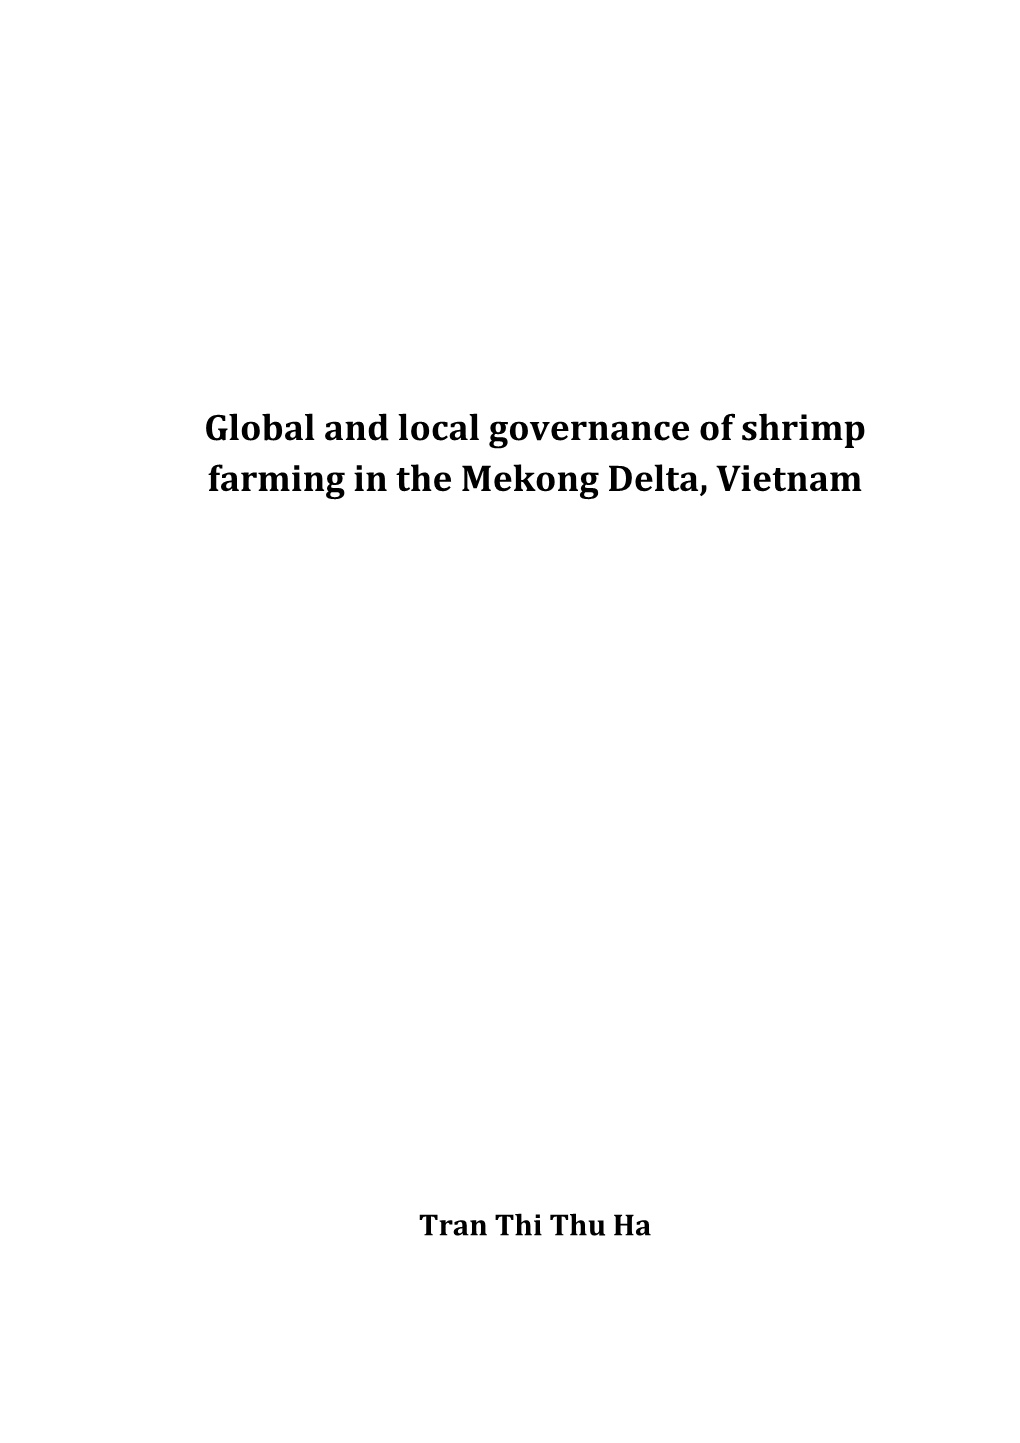 Global and Local Governance of Shrimp Farming in the Mekong Delta, Vietnam